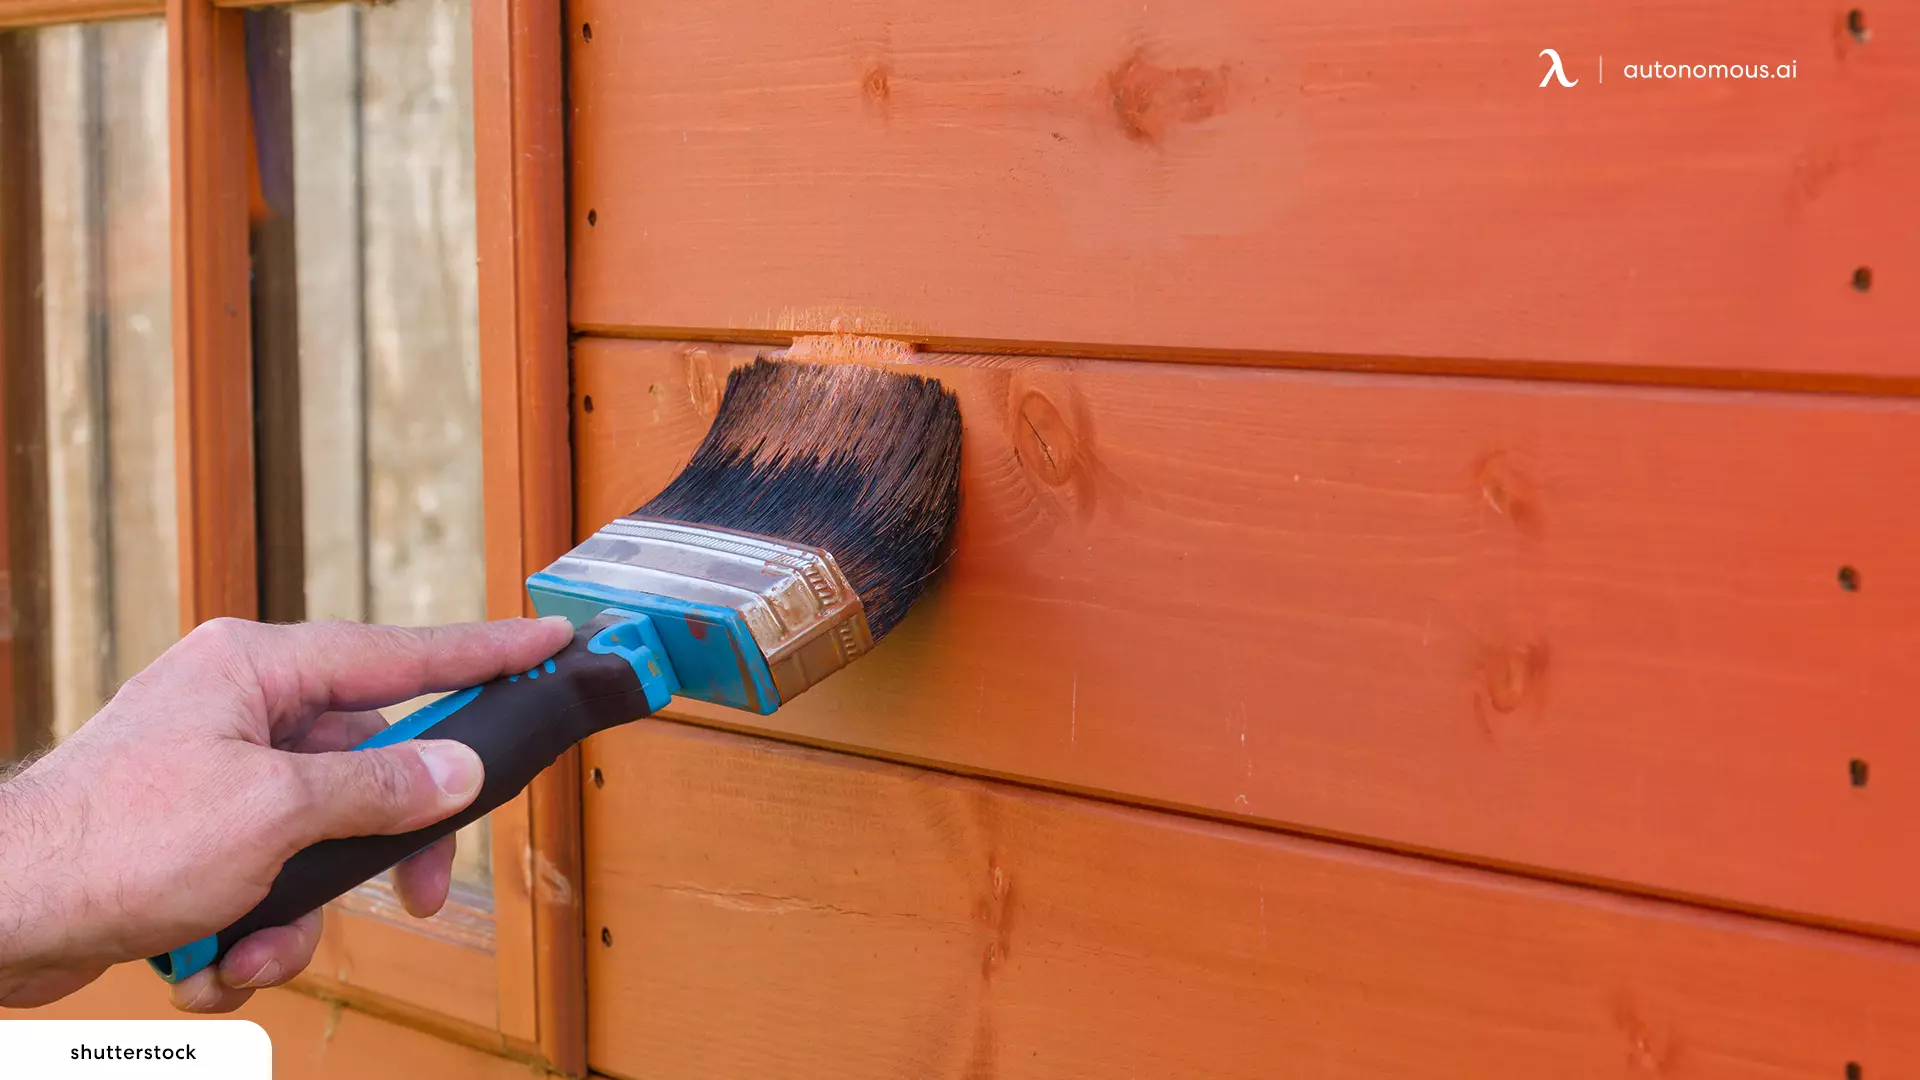 Shed Stain Ideas – Painted vs. Staining